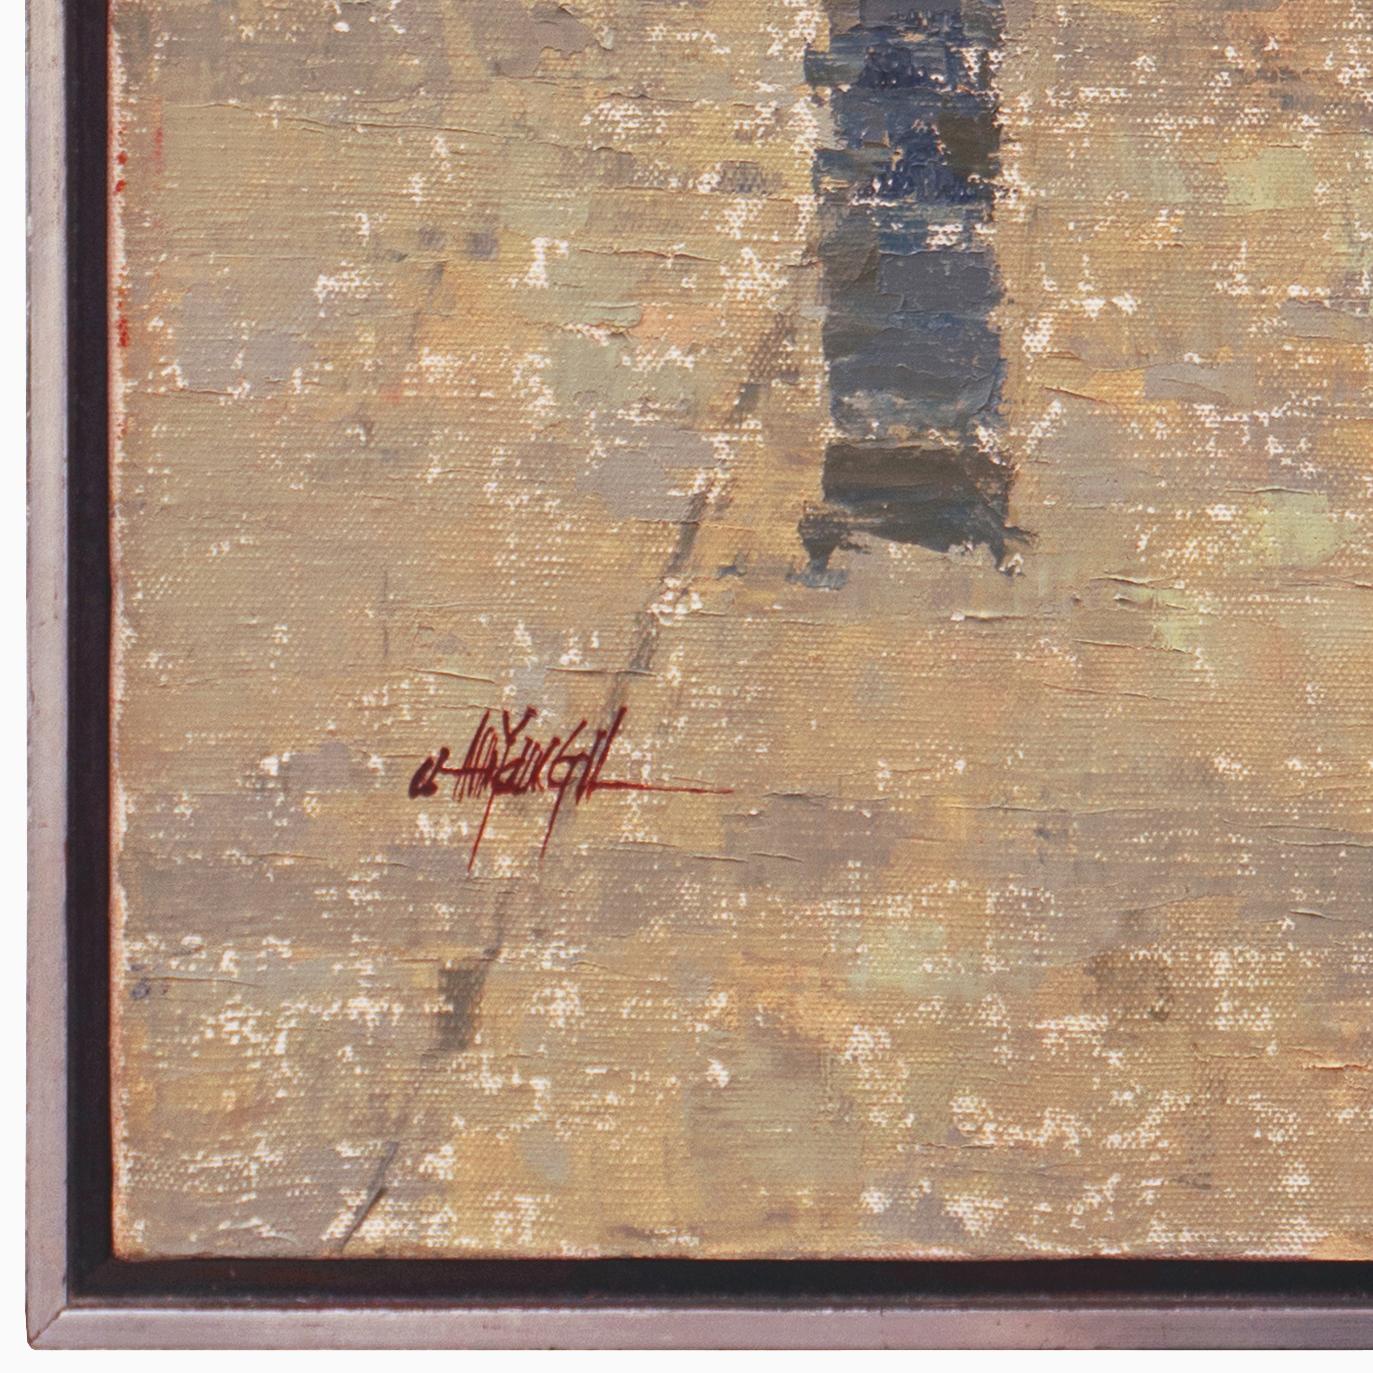 Signed lower left, 'Ahn Young-Il' and painted circa 1975.

Young-Il Ahn was born in 1934 in Seoul to an artistic family. Shortly after his birth, Ahn's family moved to Northeast Tokyo, where he began painting, was acknowledged as a child prodigy and